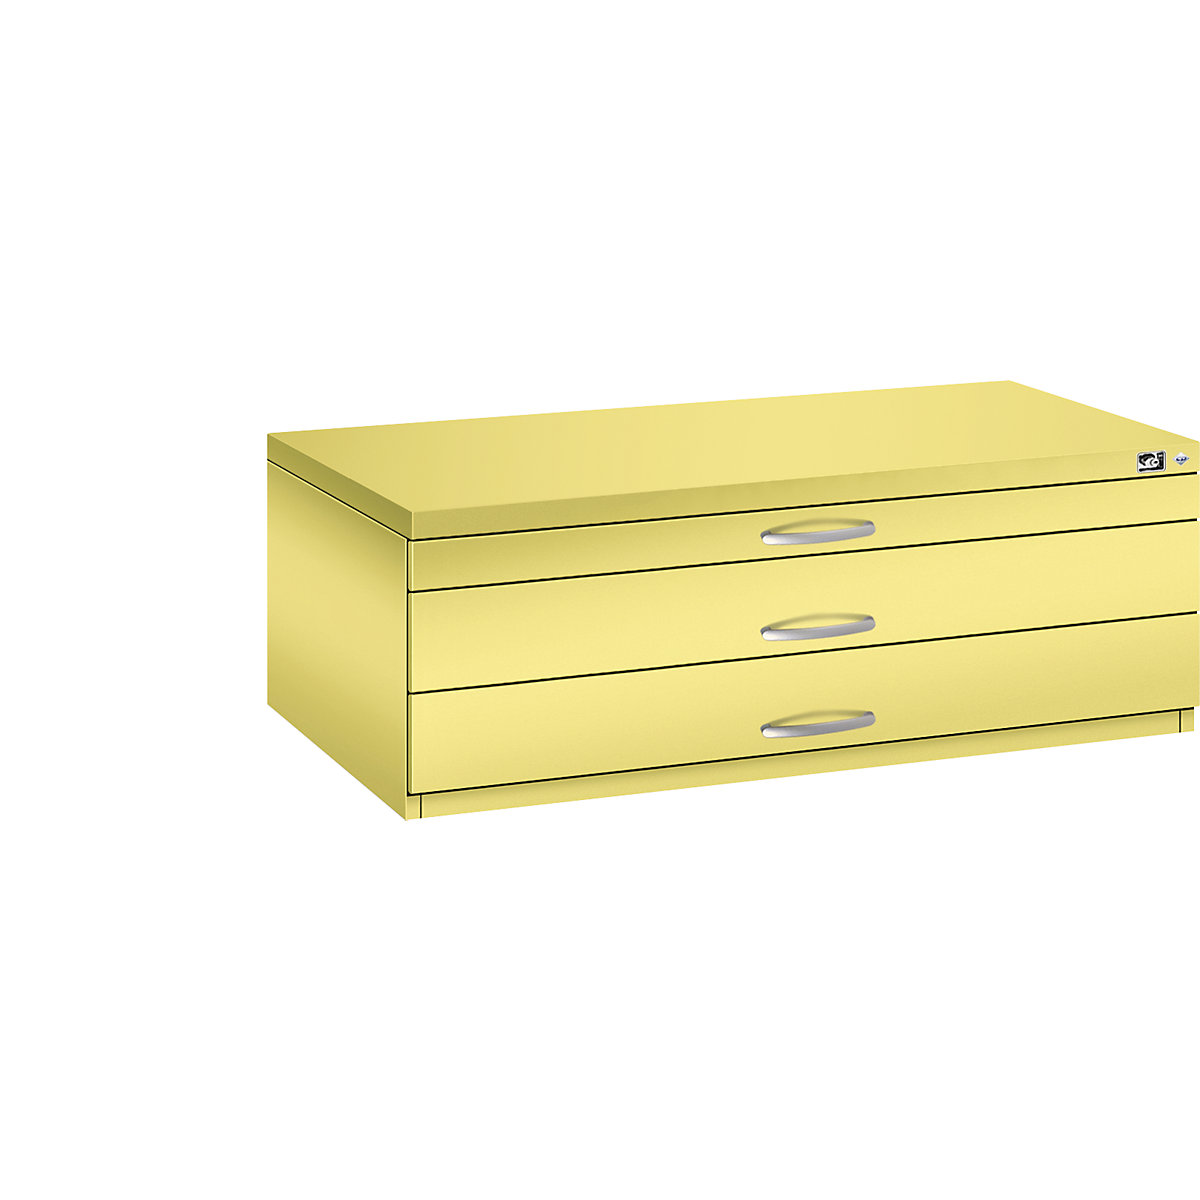 Drawing cabinet – C+P, A1, 3 drawers, height 420 mm, sulphur yellow-16